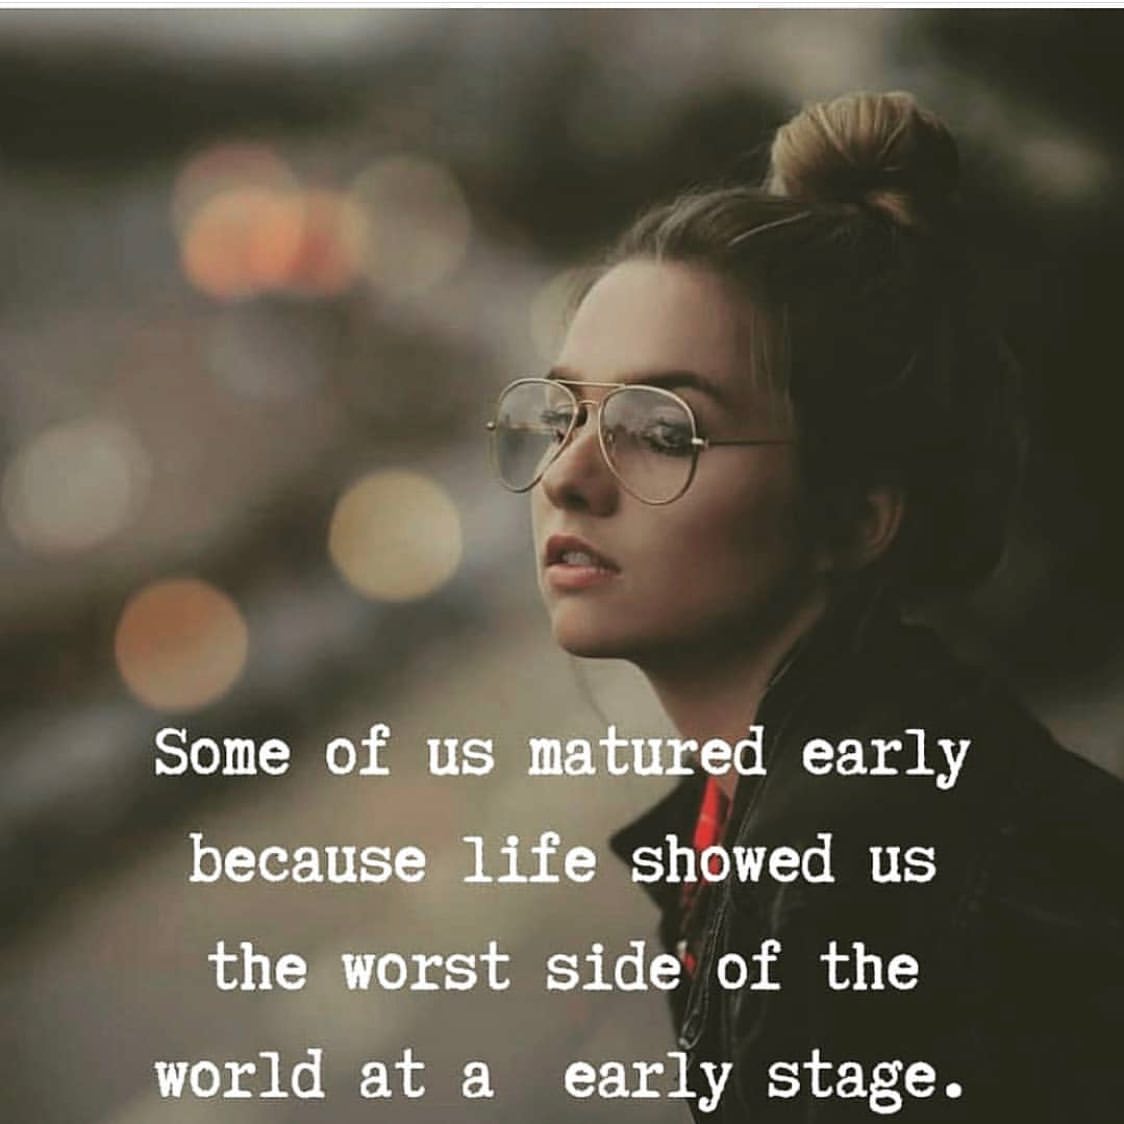 Some of us matured early because life showed us the worst side of the world at a early stage.